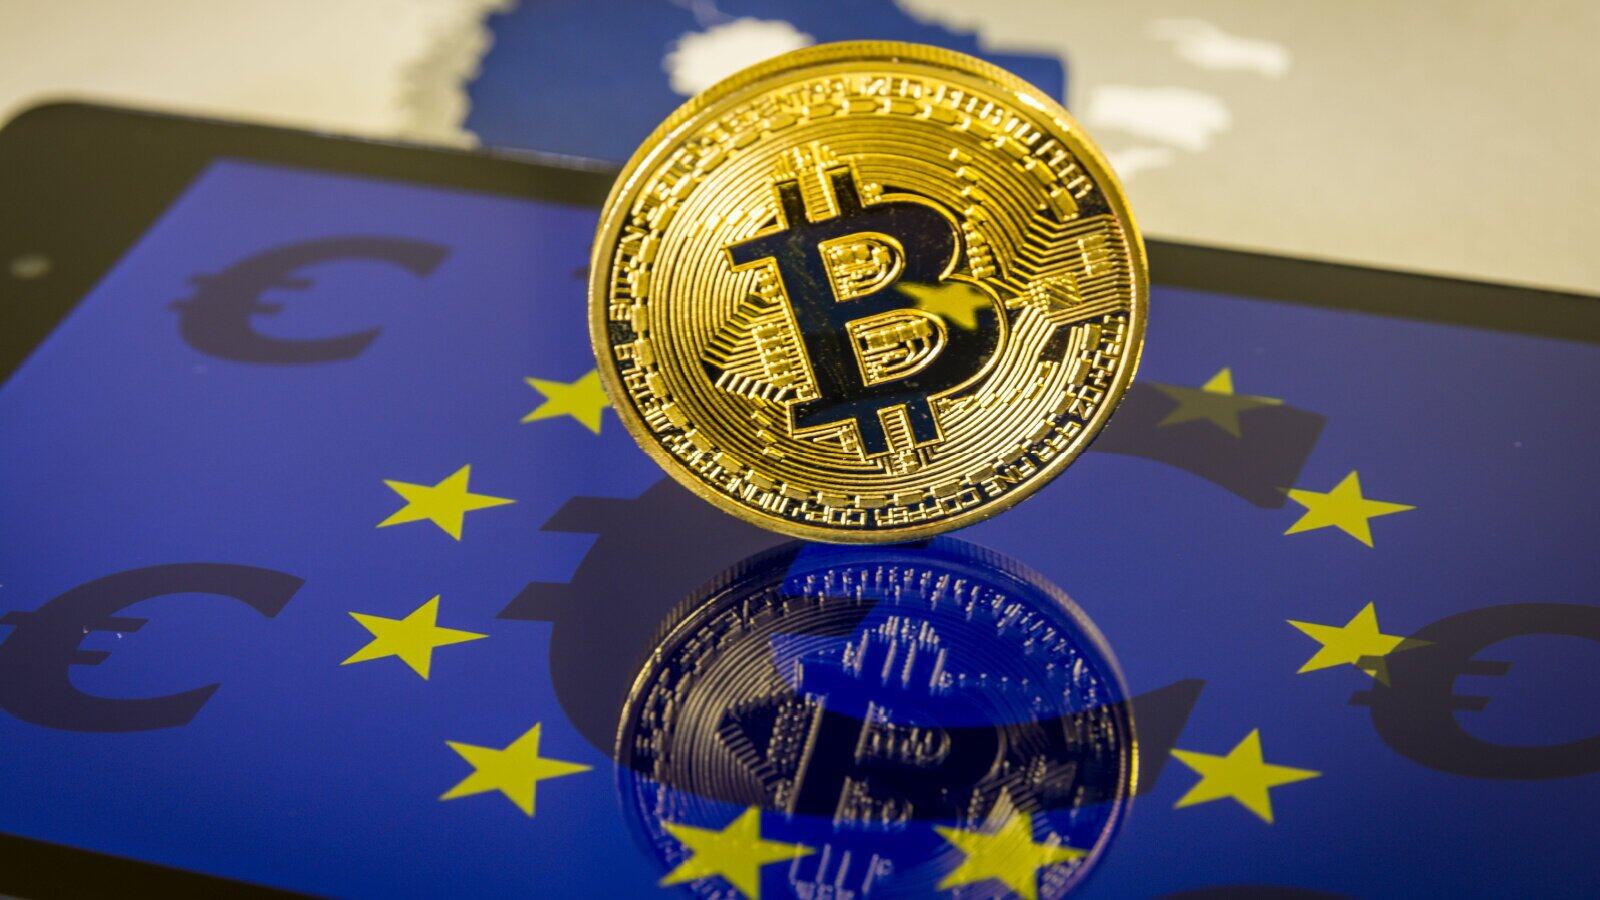 Will MiCA Jumpstart Crypto in EU? It's ‘Too Early To Tell’, Says Circle